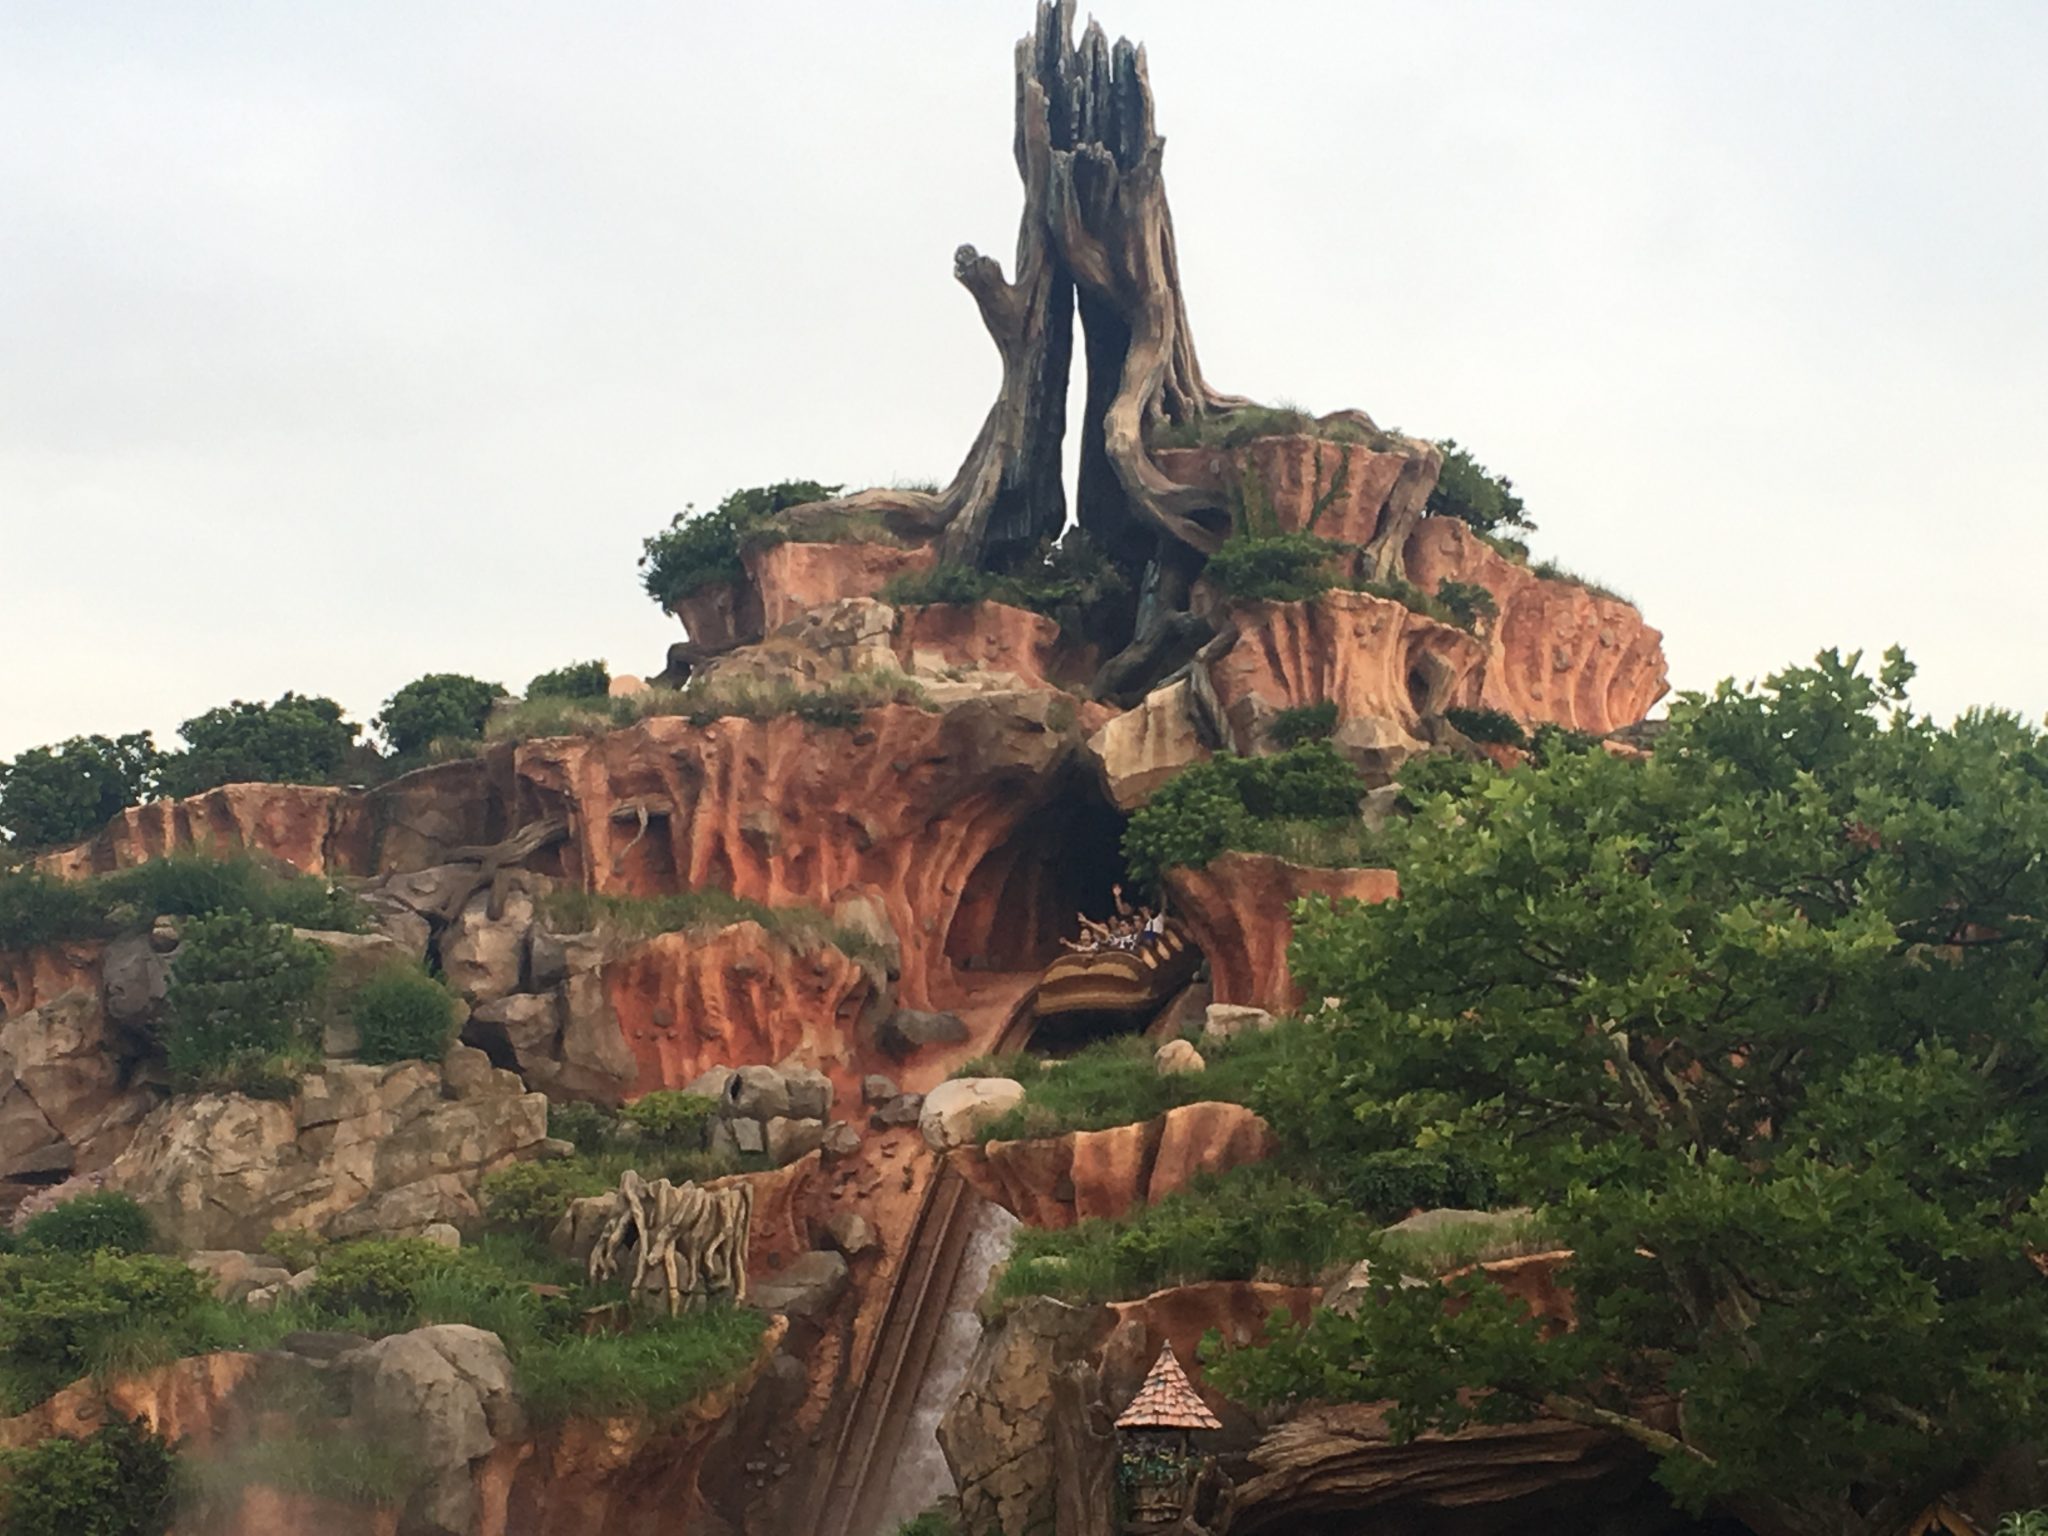 Local Tells Top 10 Best Rides And Attractions In Tokyo Disneyland